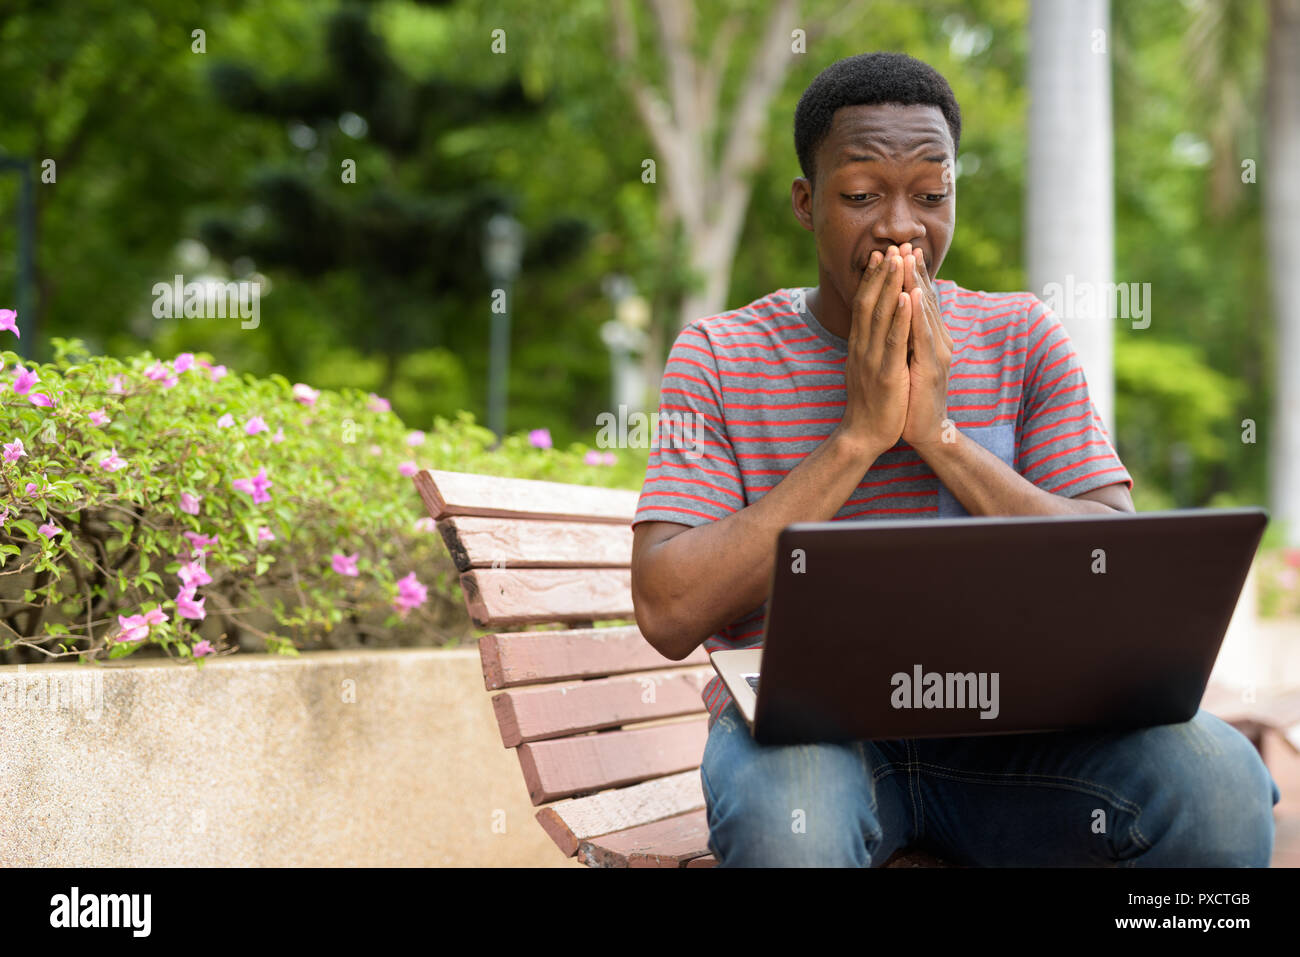 Shocked handsome African man using laptop in park while looking surprised Stock Photo